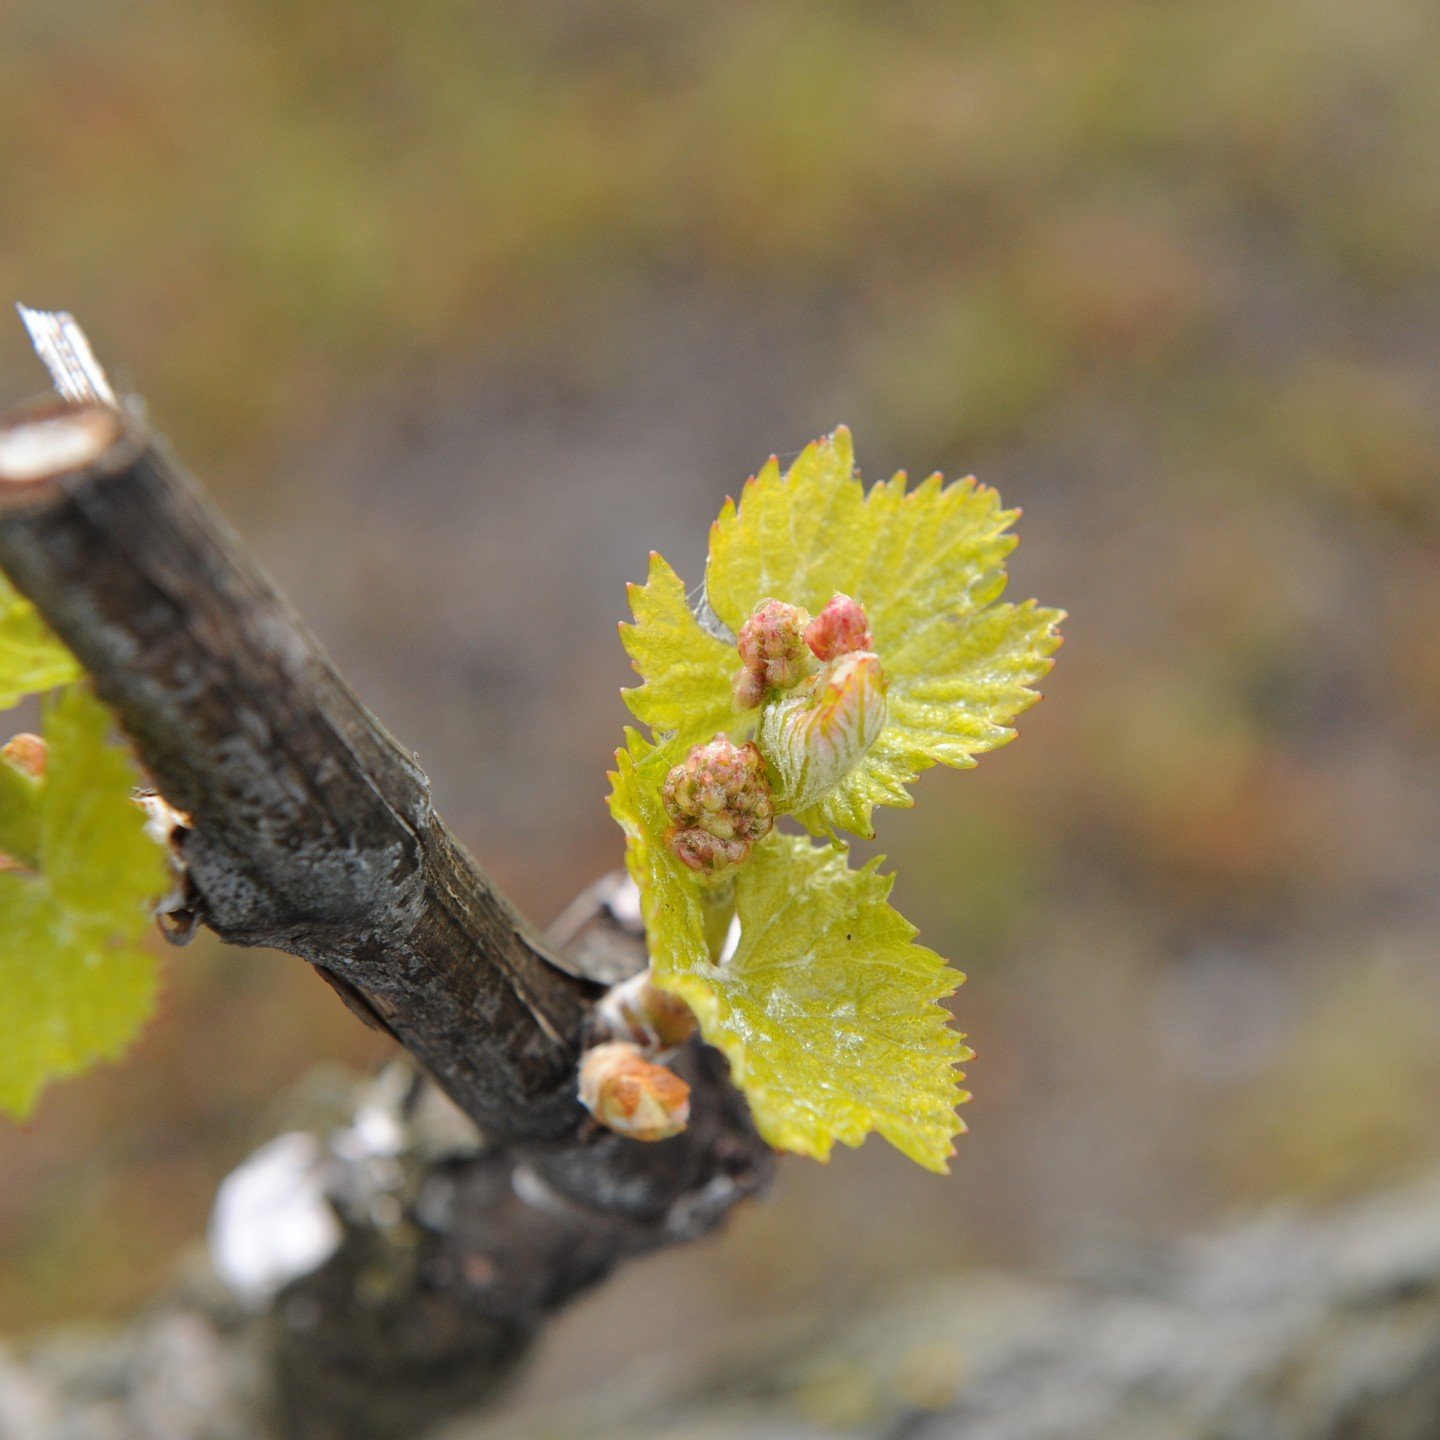 As the sun sets on another budbreak season in the Russian River Valley, we find ourselves reminiscing about the beauty and promise that this time of renewal brings to the vineyards. The gentle unfurling of buds, the whispers of new growth, and the an